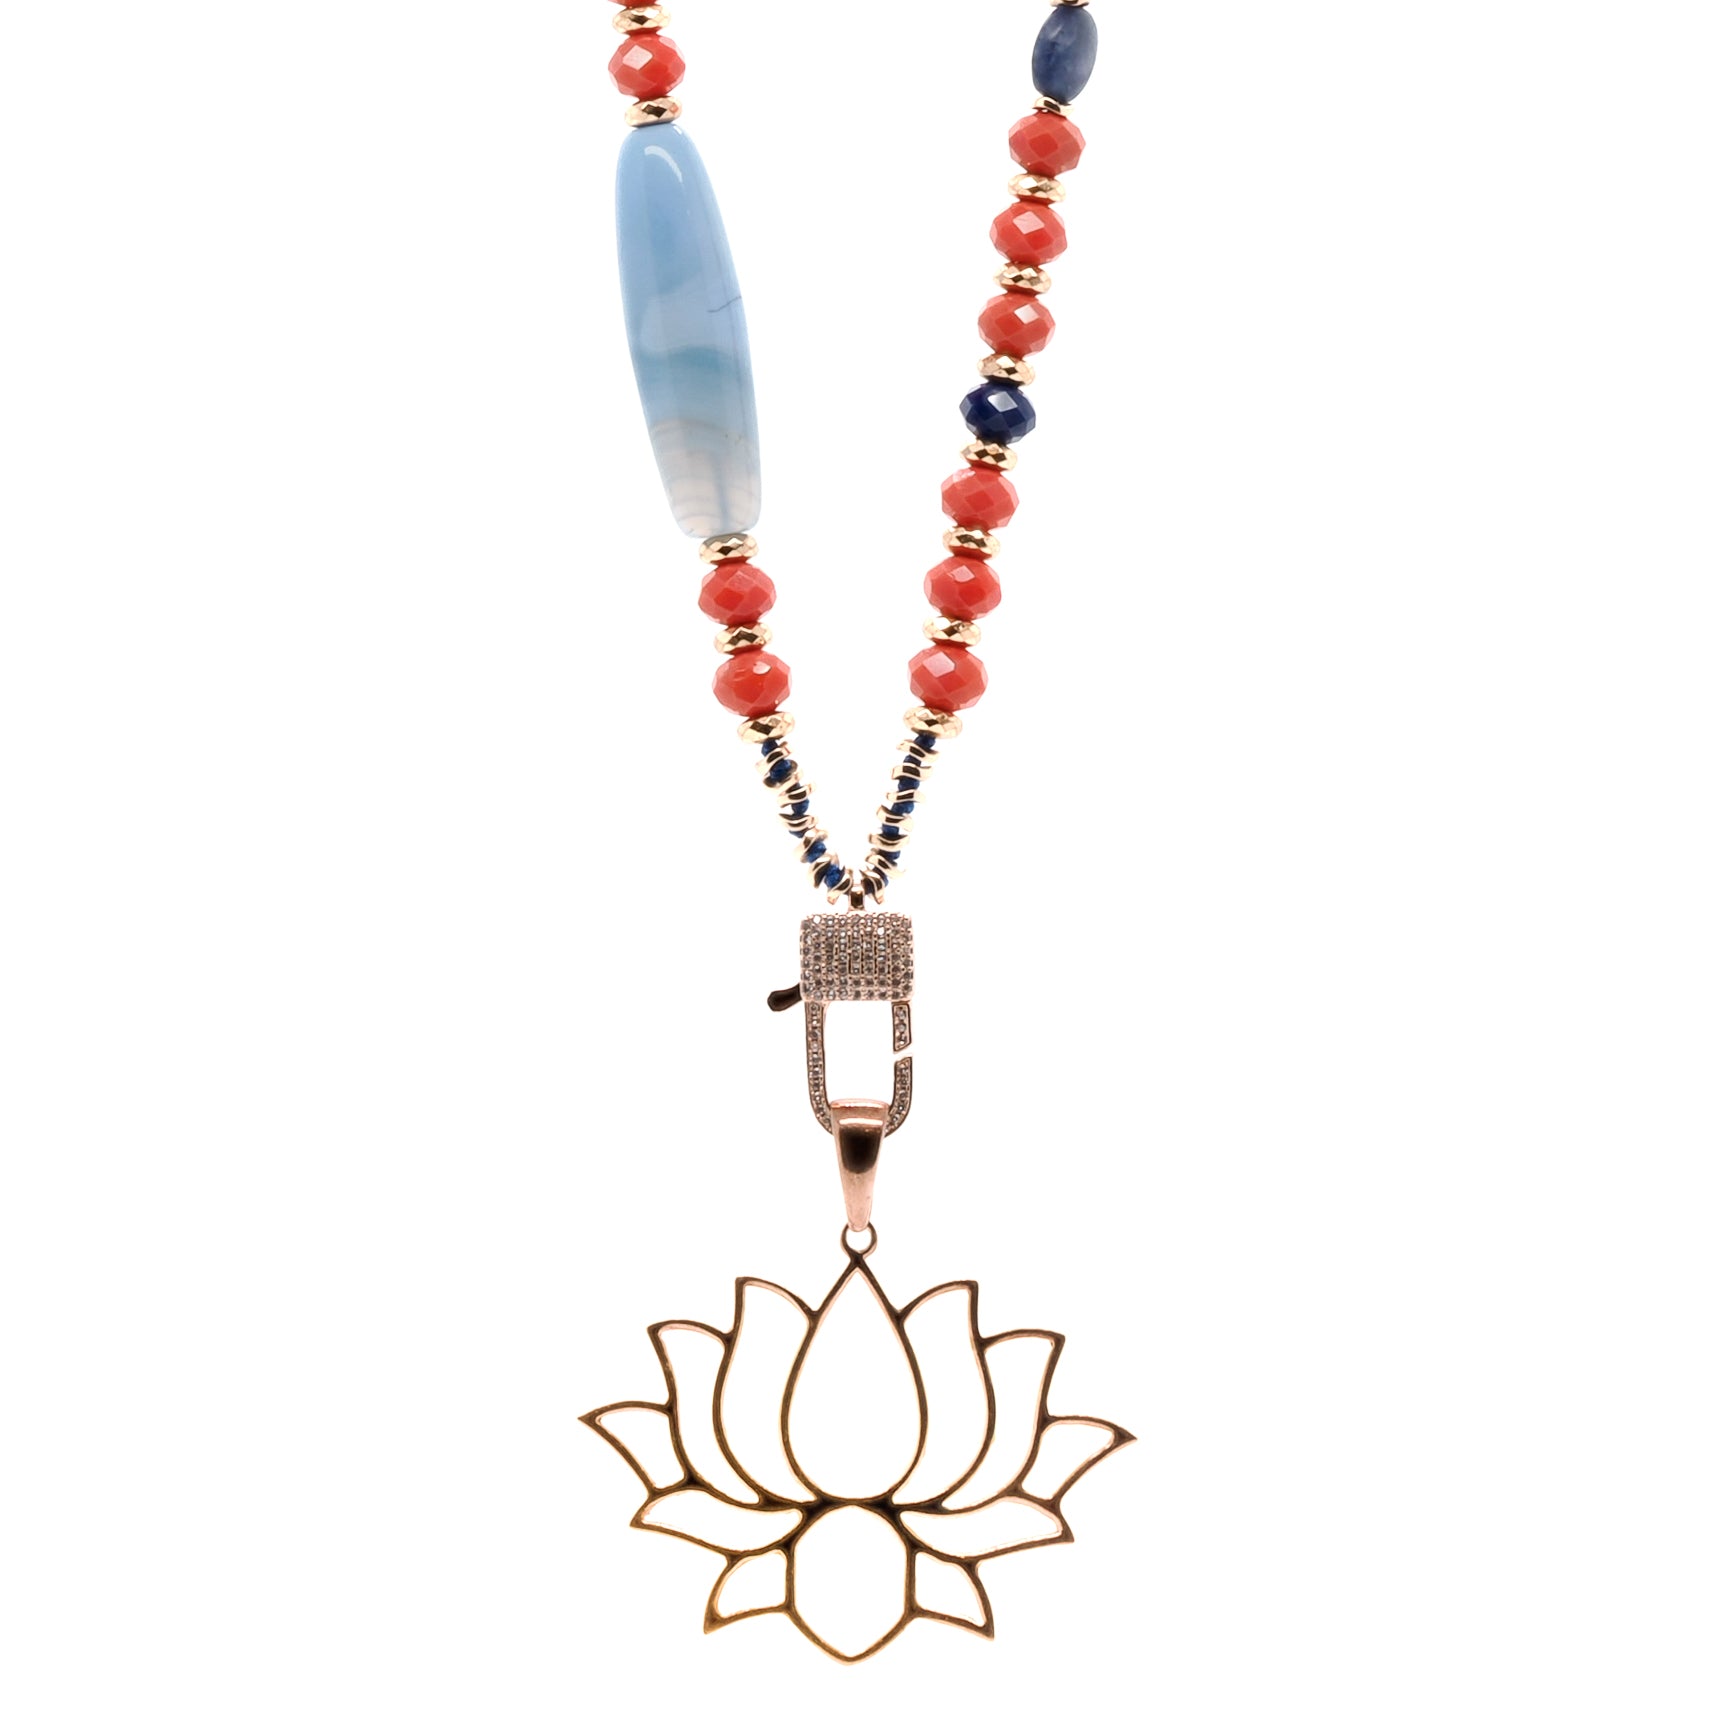 Embrace the spiritual journey with the Lotus Flower Mandala Necklace, featuring vibrant Lapis Lazuli and Blue Agate beads, symbolizing enlightenment and inner peace.